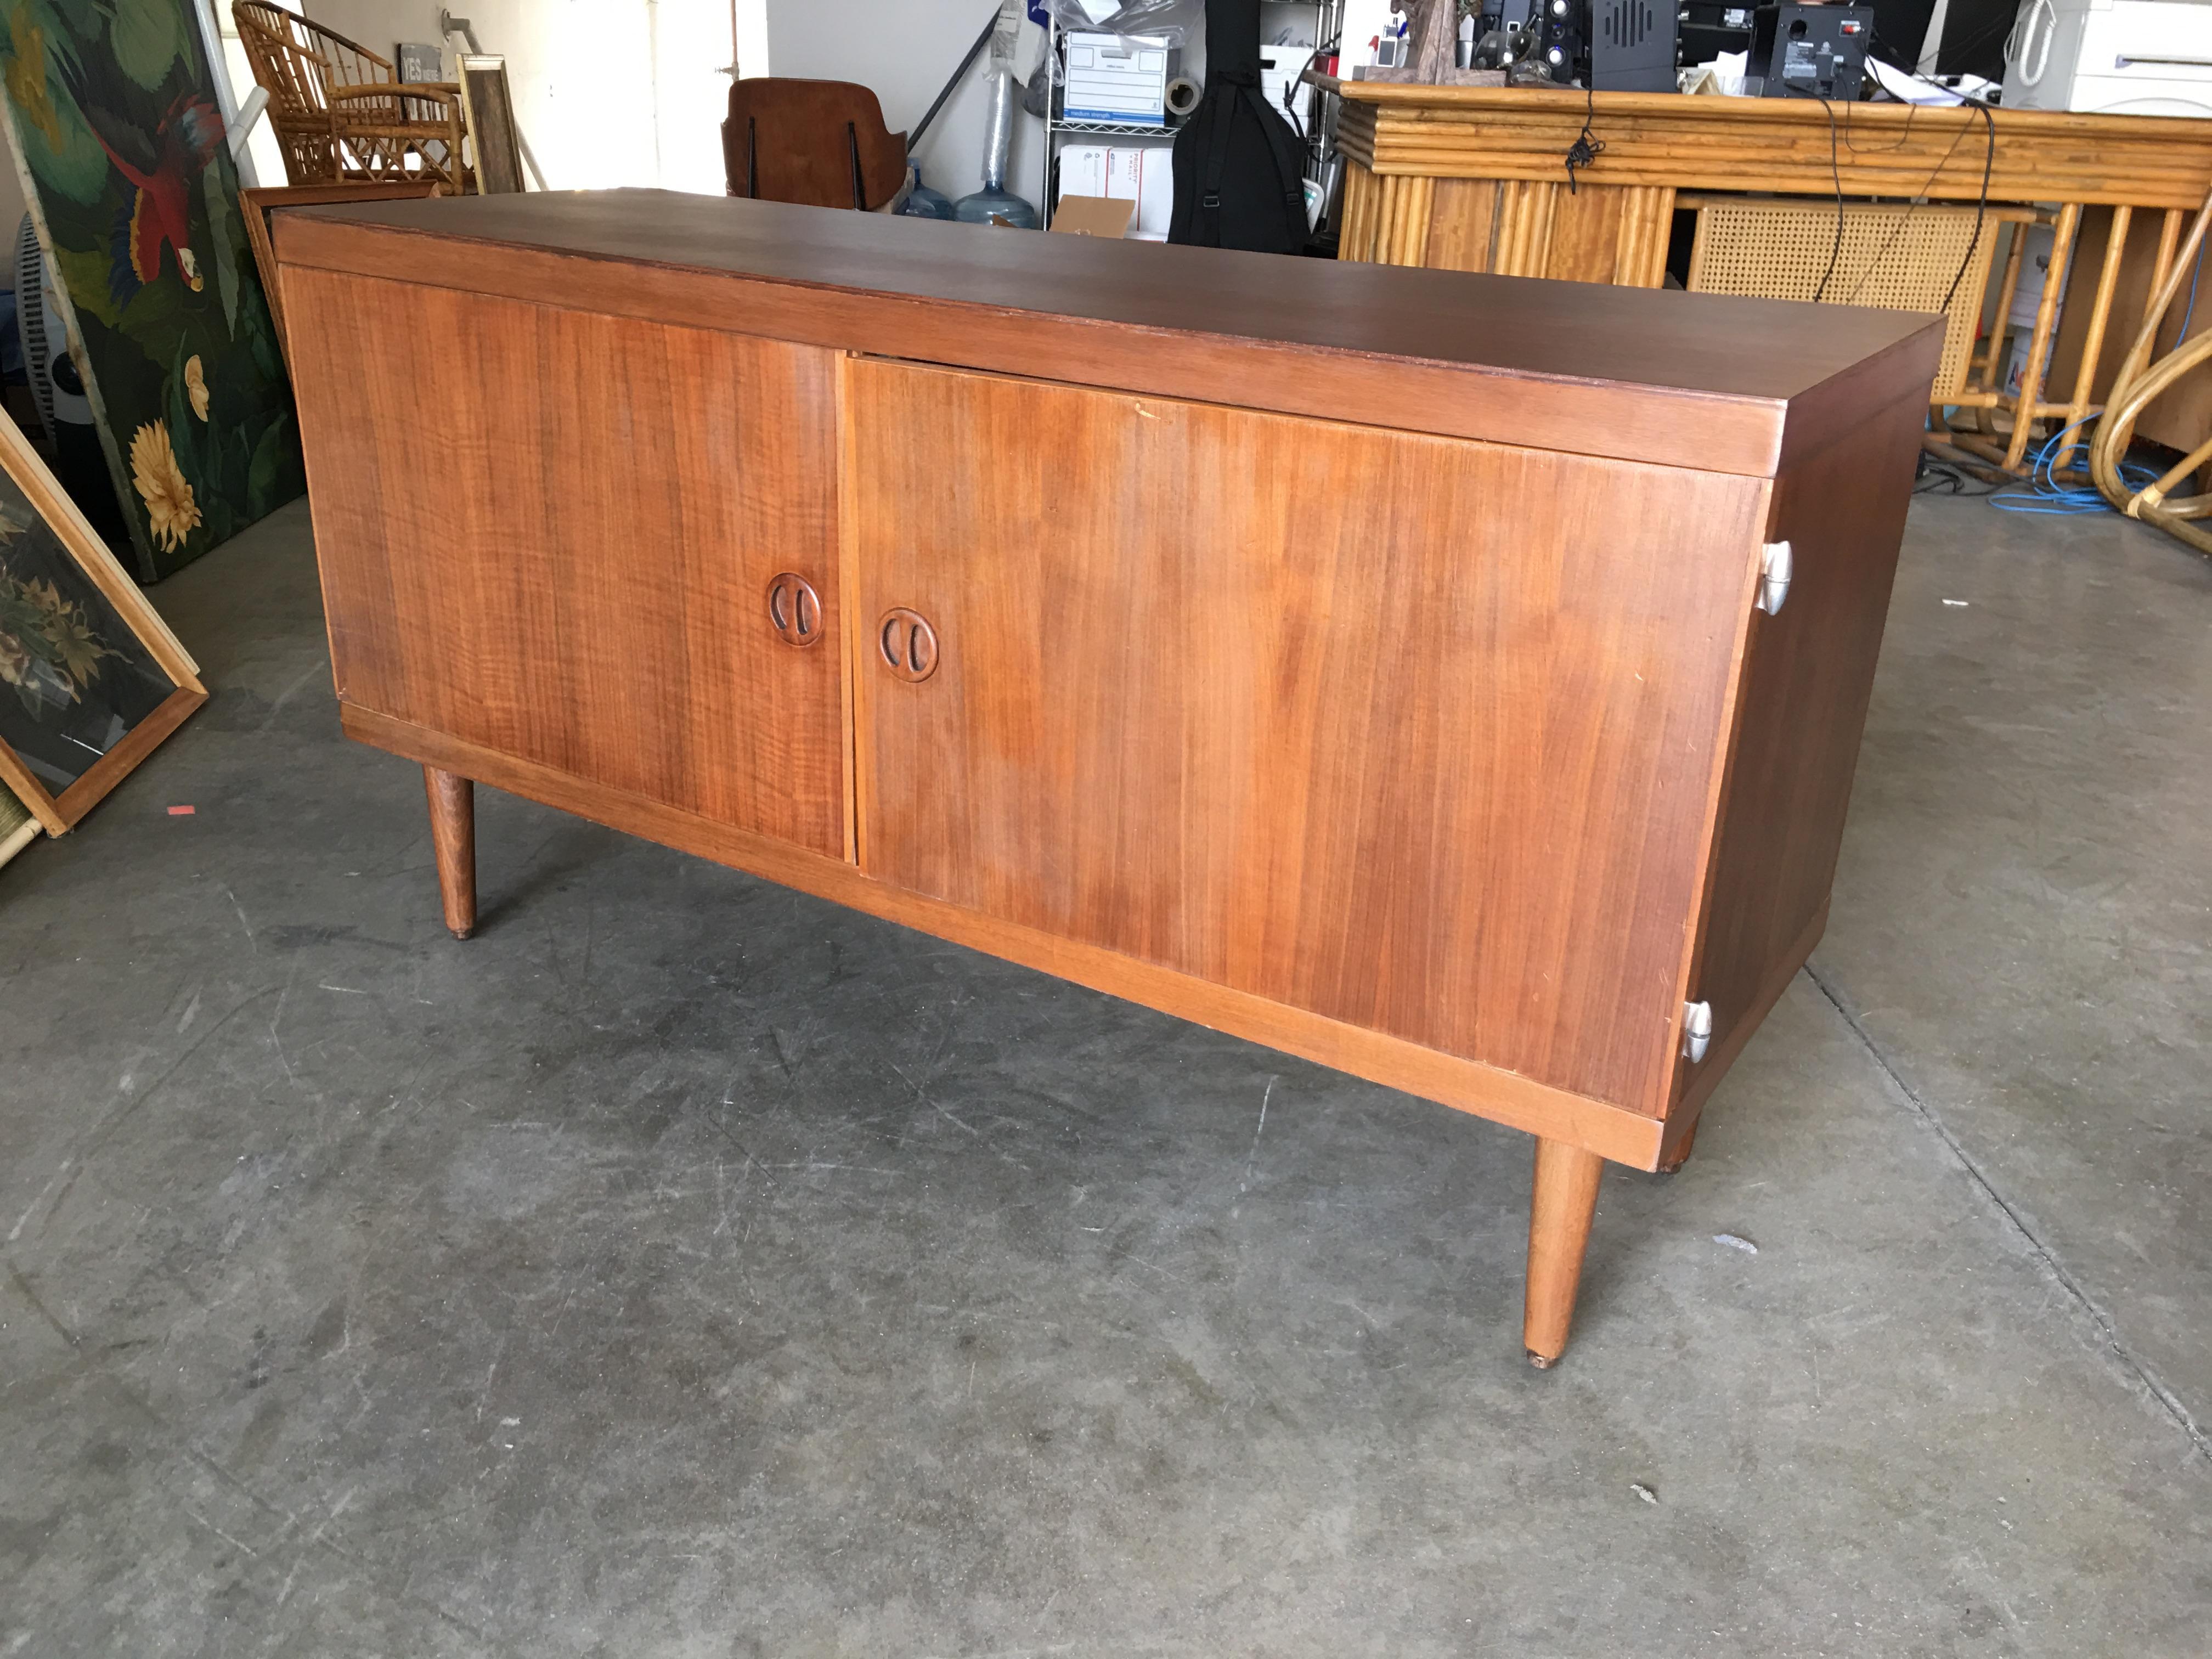 American Danish Modern Credenza Cabinet with Fancy Hinges and Sculpted Pig Nose Pulls